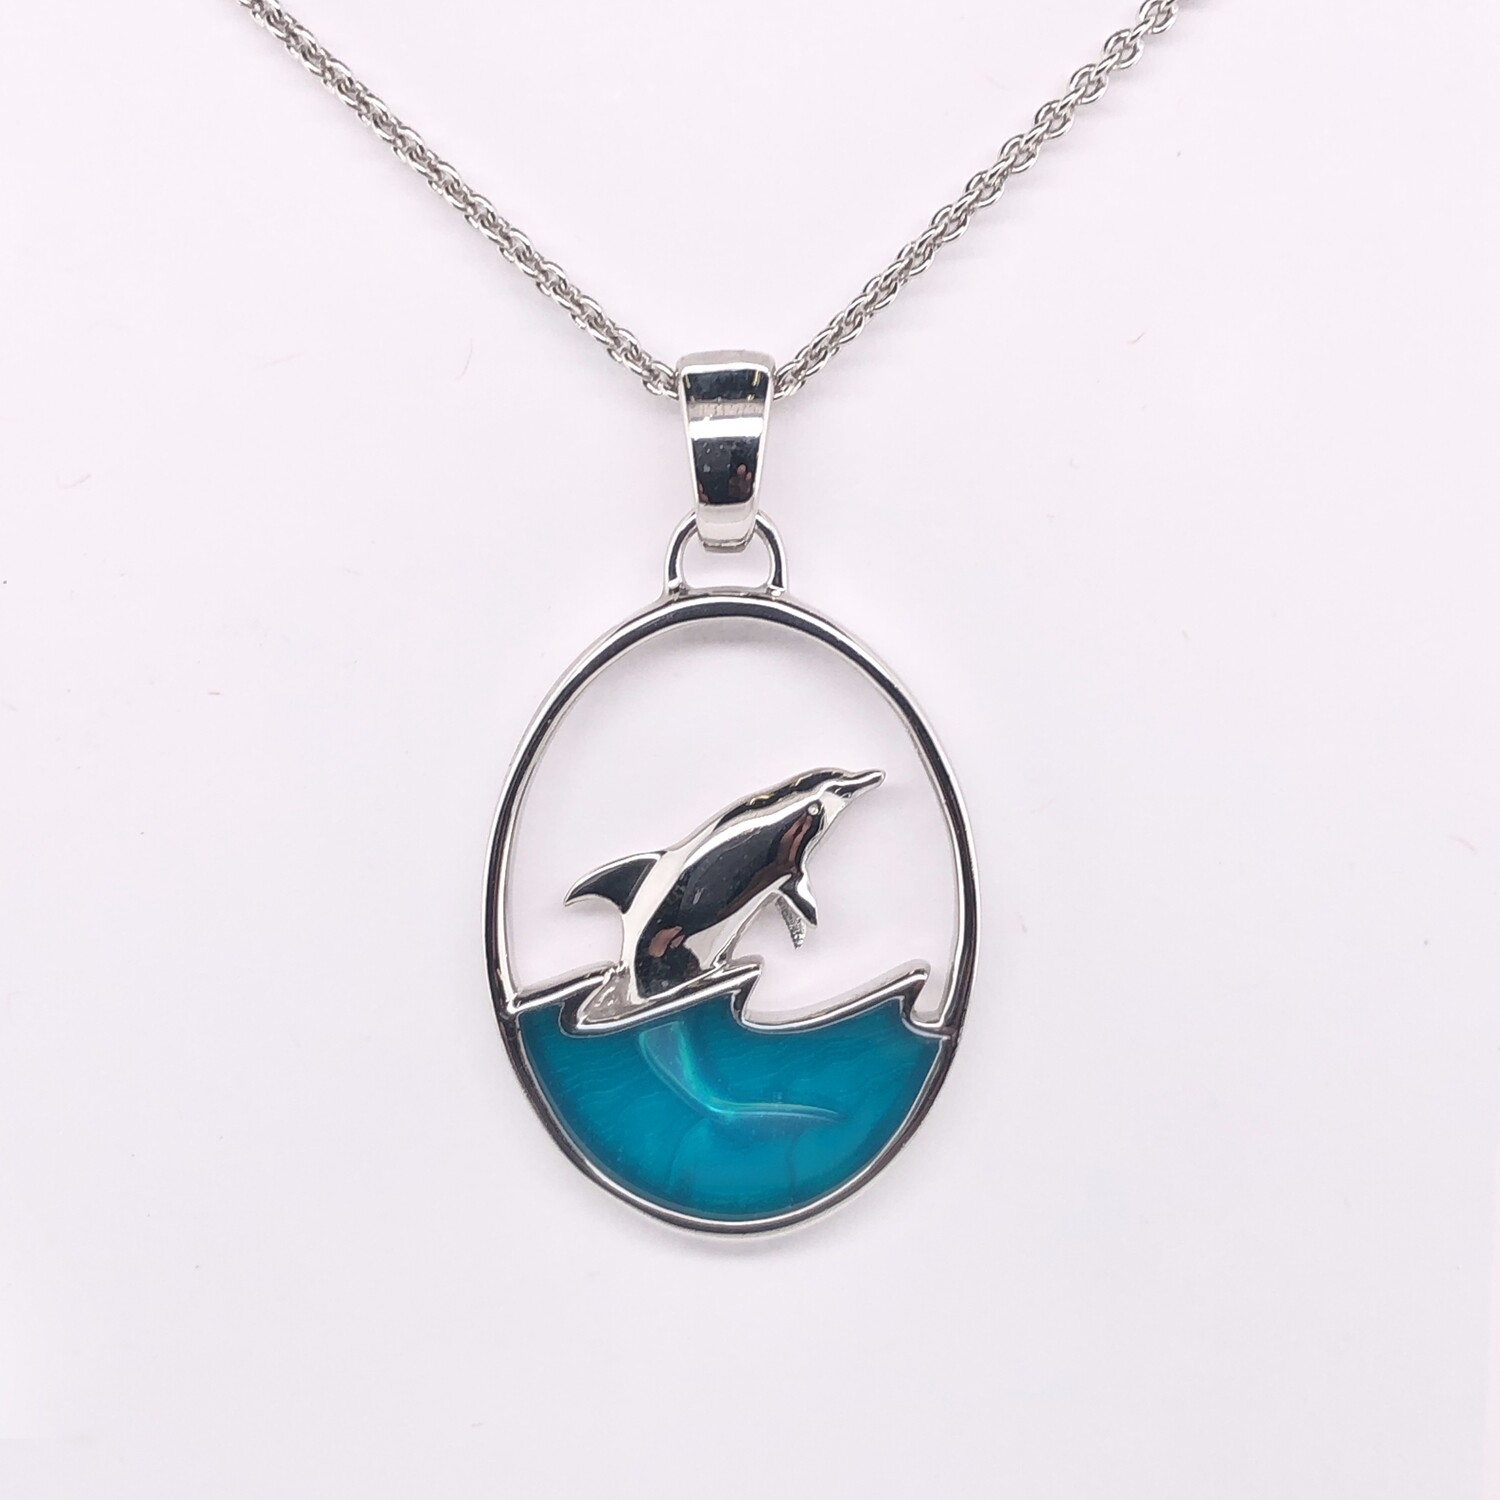 004 Leaping Dolphin Pendant